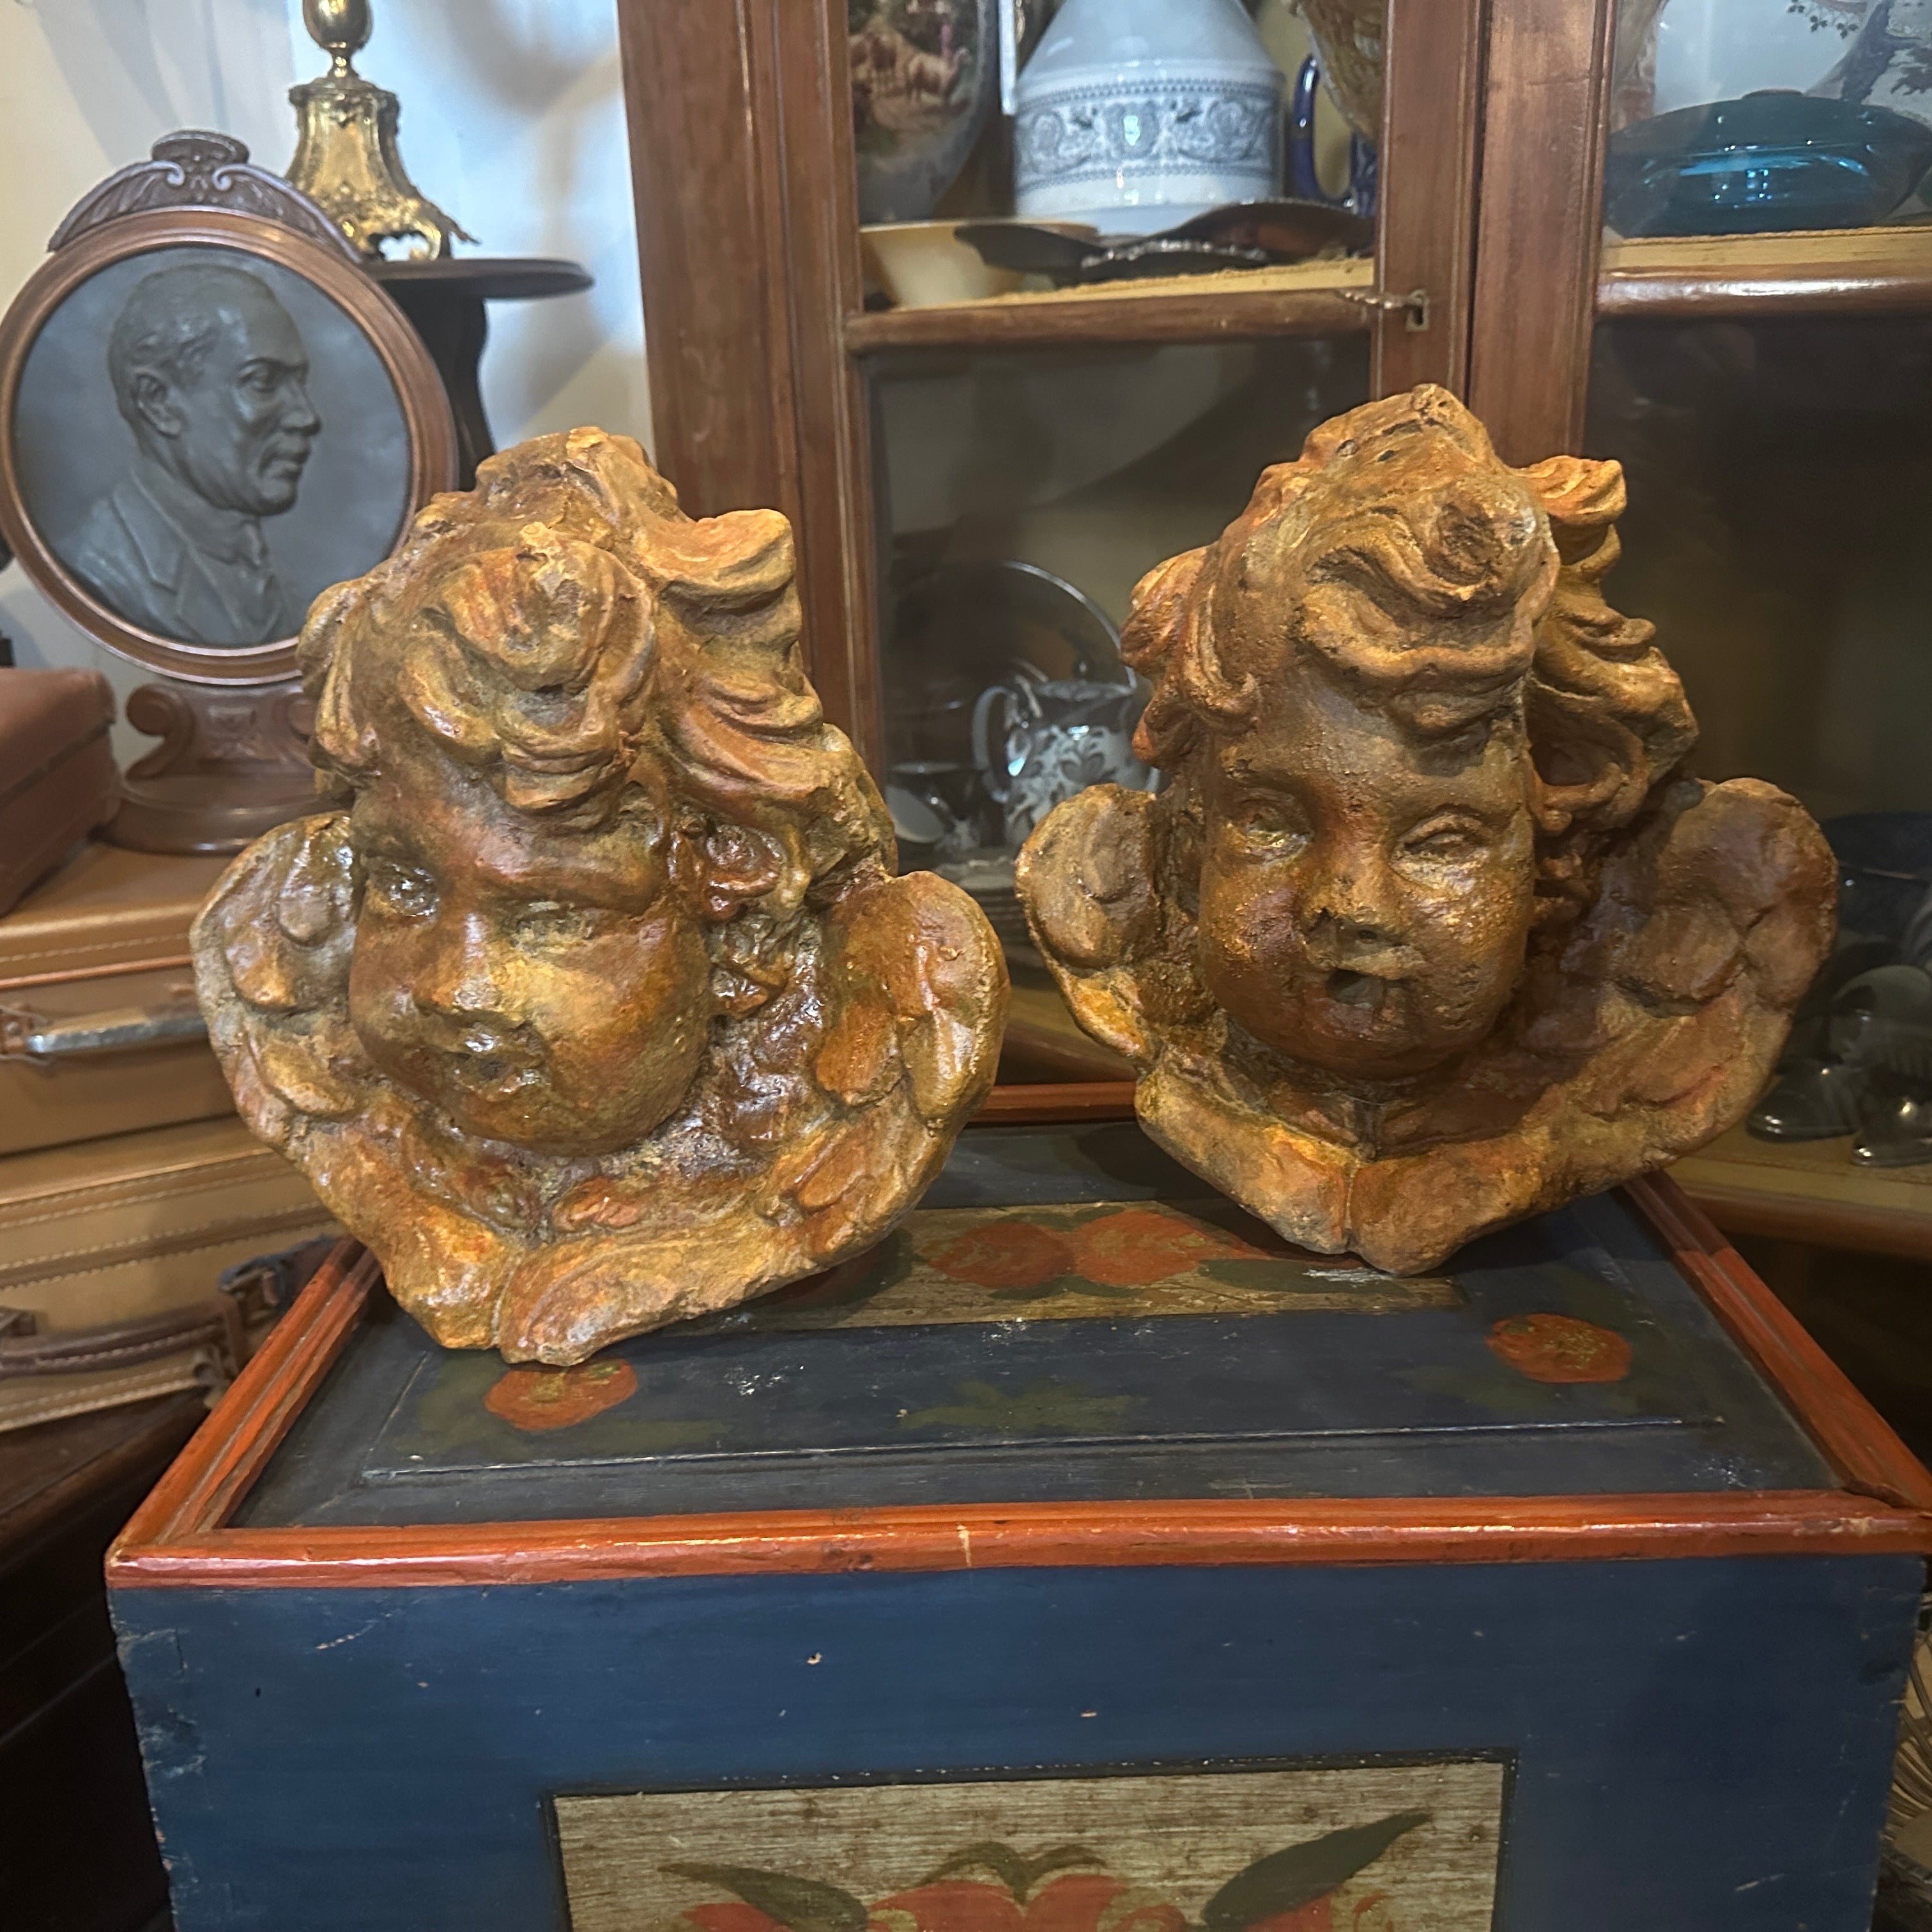 Two sculptures of angels heads in stone mixture made in 1930s in Sicily, they were used as decorations in a villa, they are in original conditions and patina with signs of use and age. The Angels are a pair of intricately crafted stone sculptures,